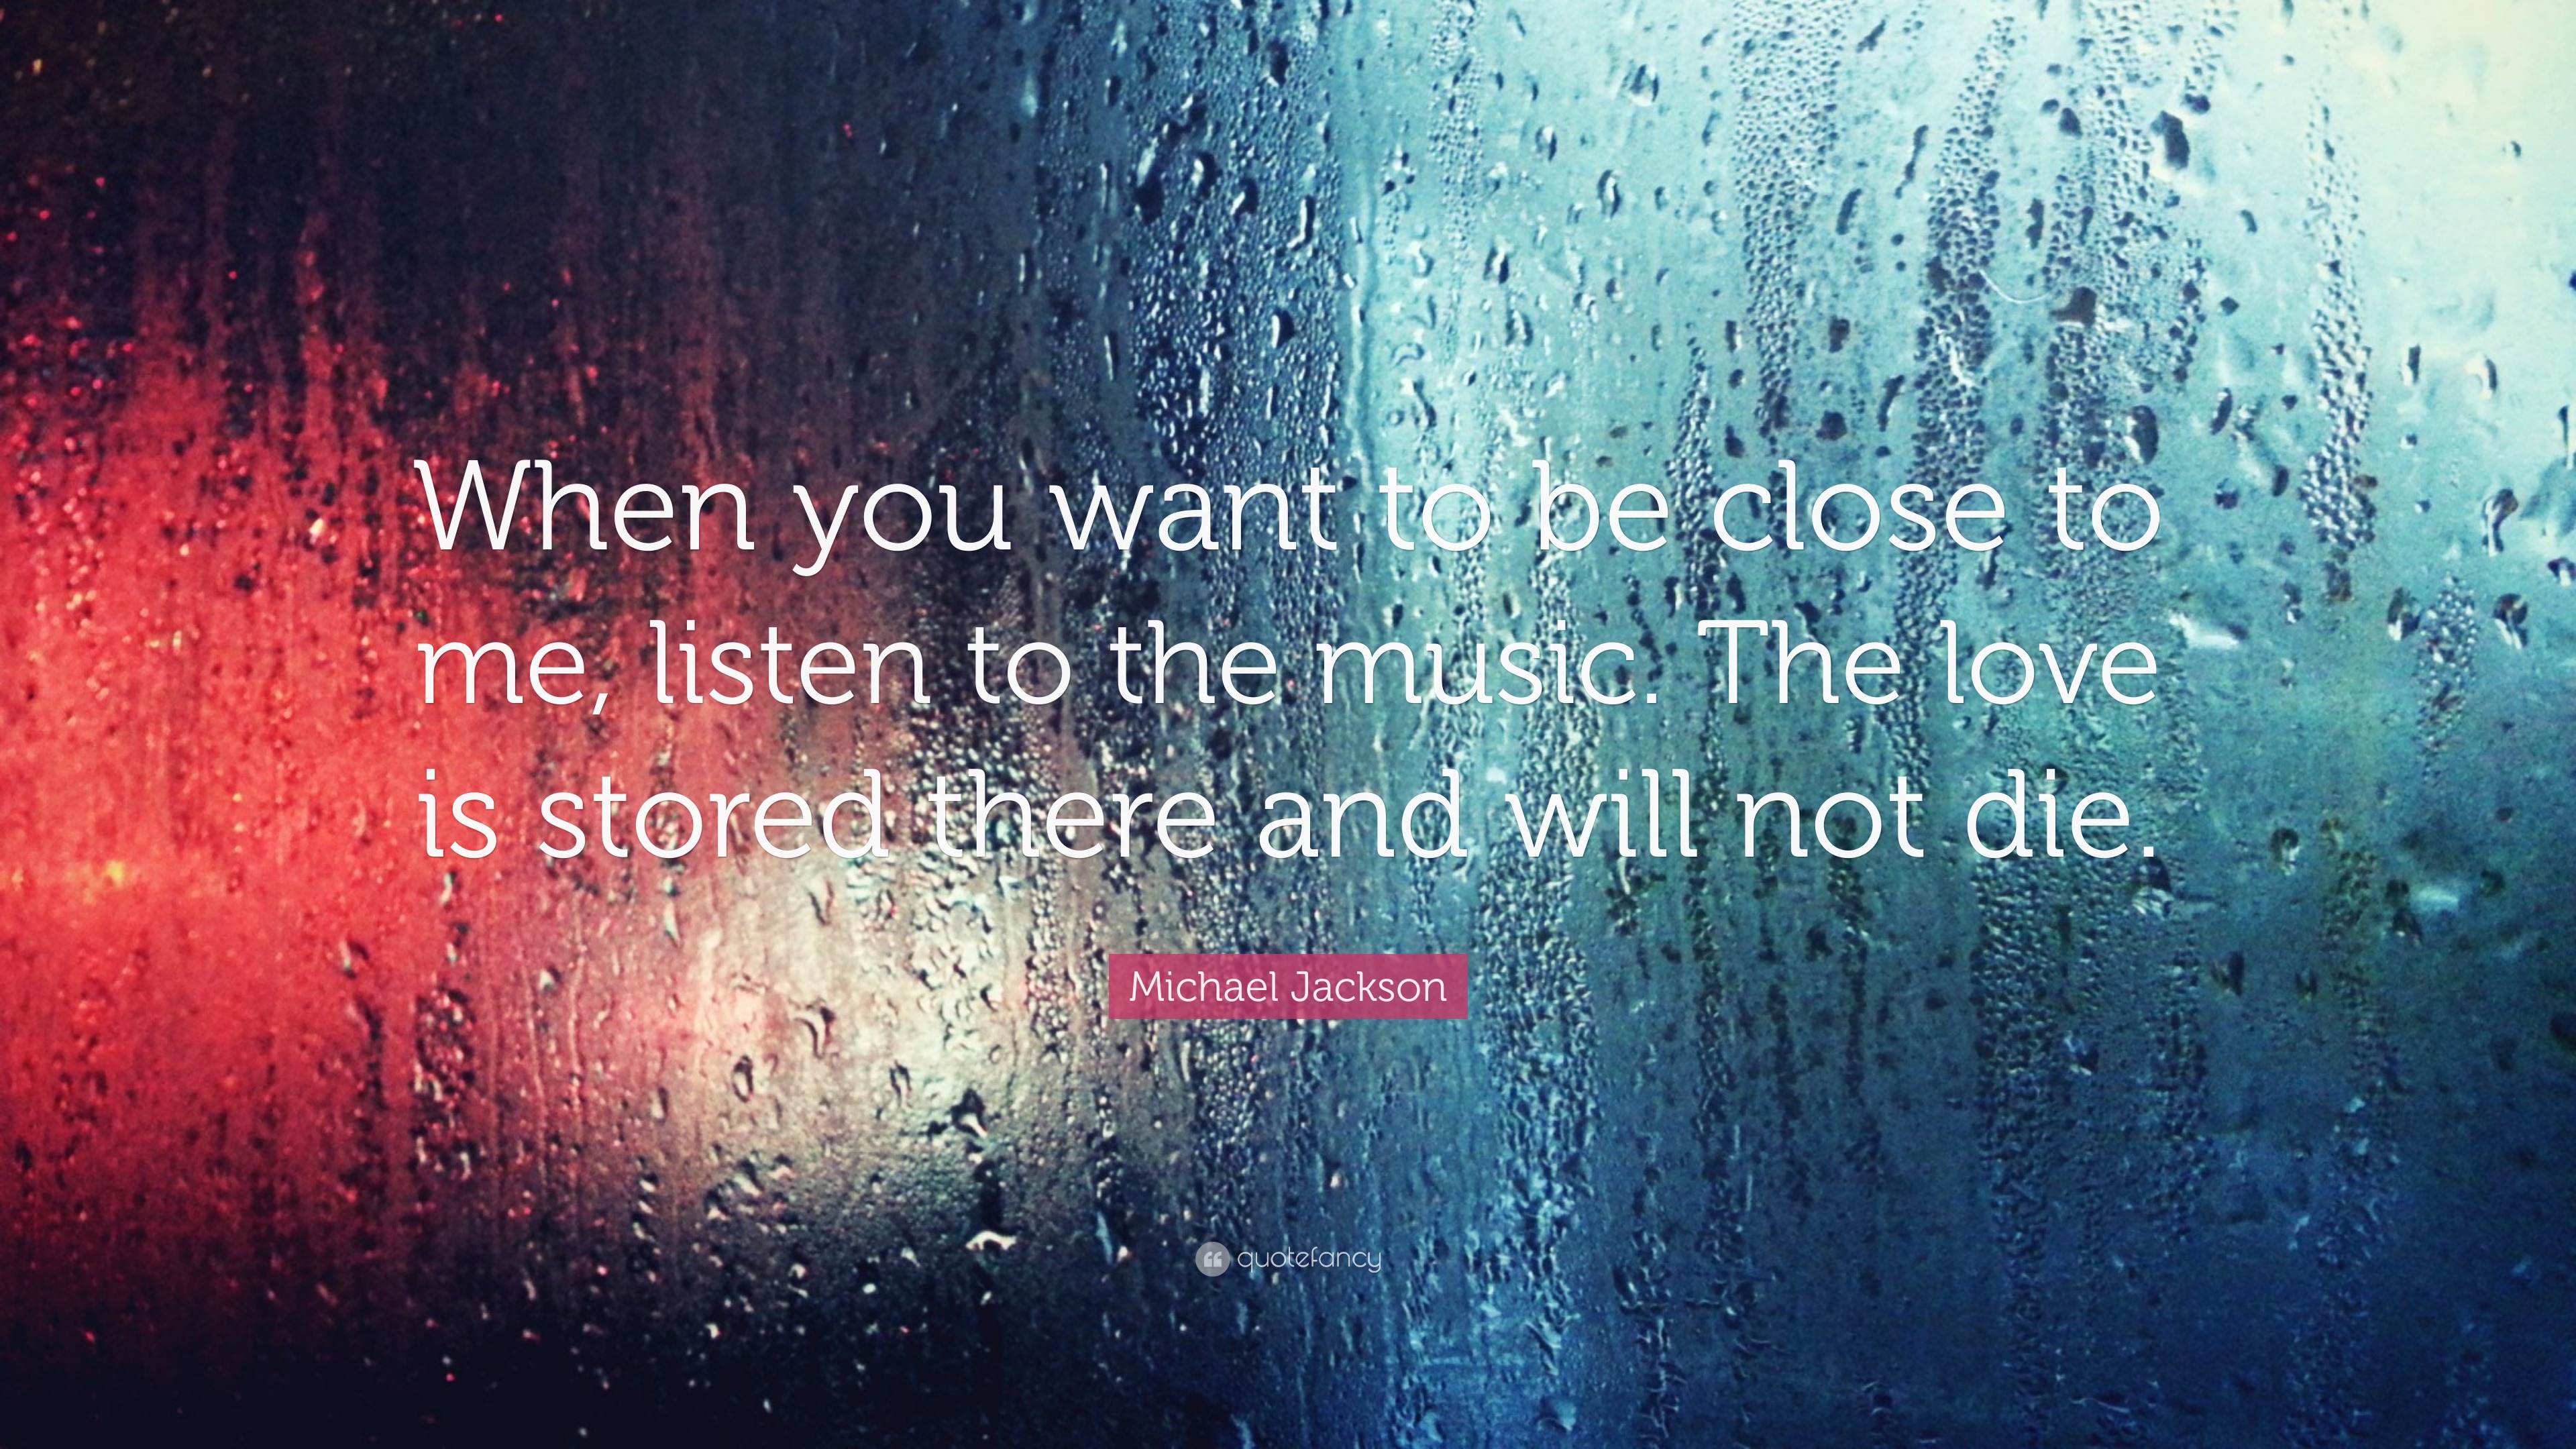 Michael Jackson quote: When you want to be close to me, listen to